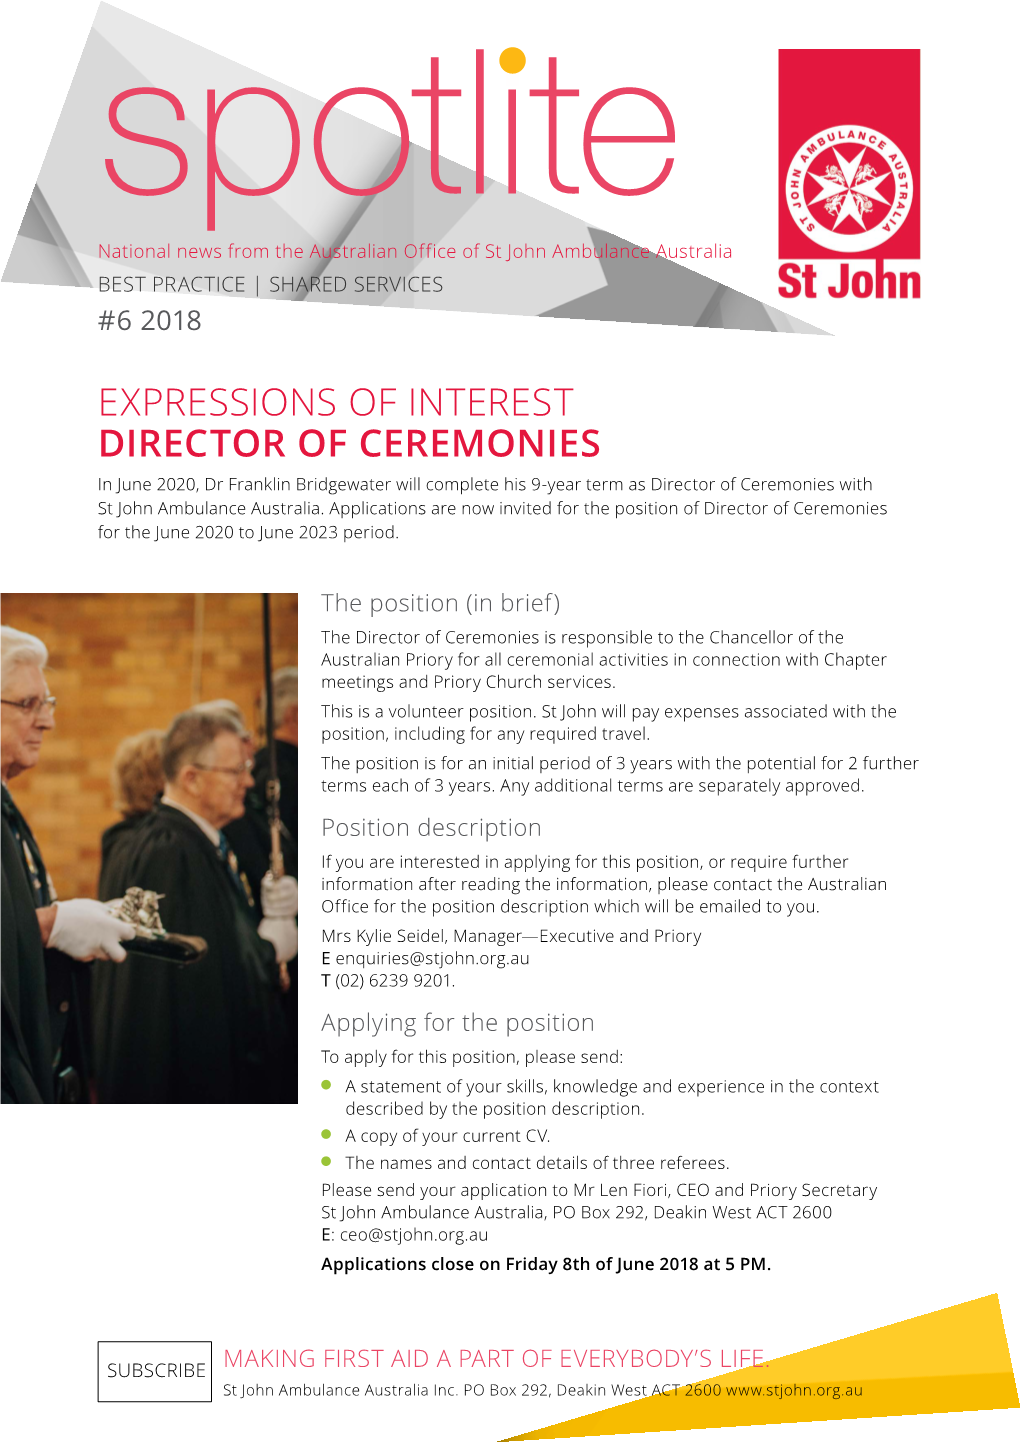 Expressions of Interest Director of Ceremonies